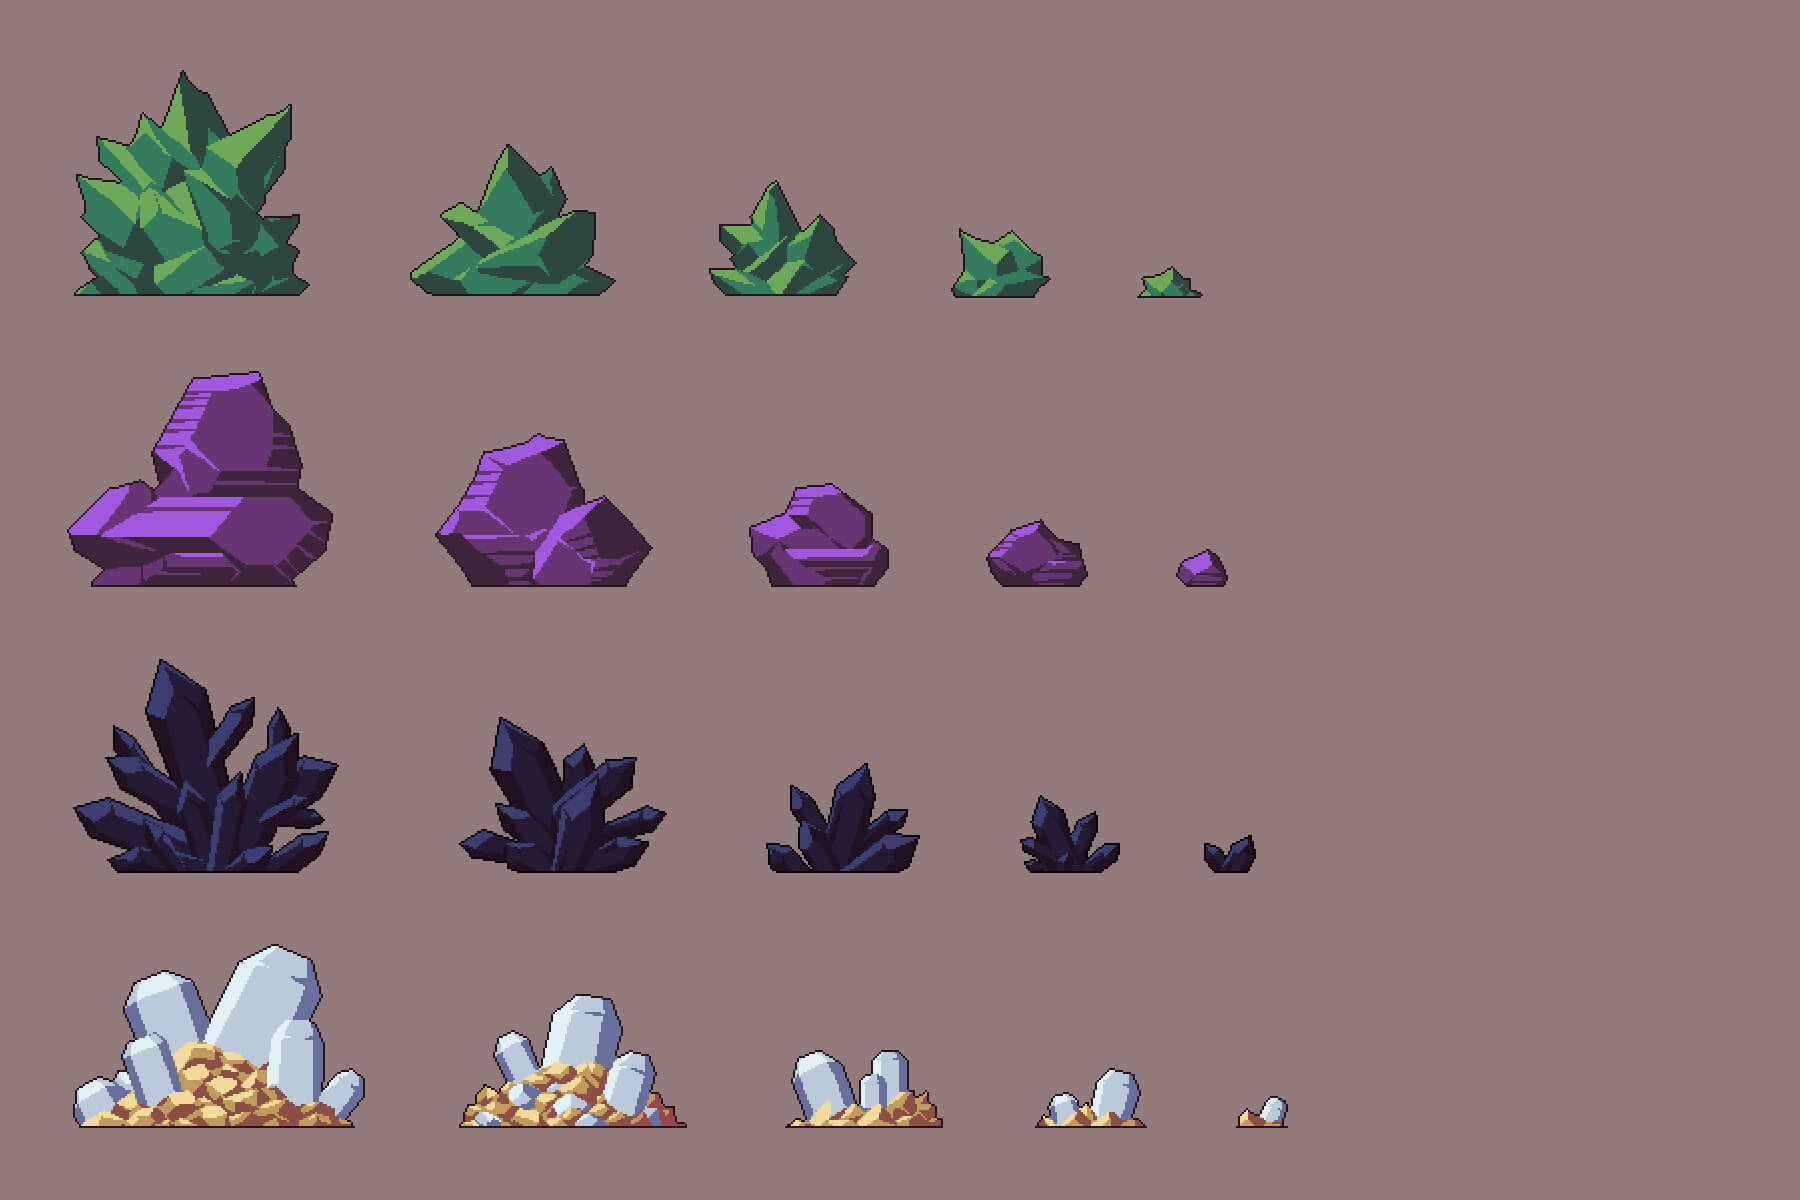 Glowing Crystals & Shrine - Animated Pixel Art Pack by Frakassets